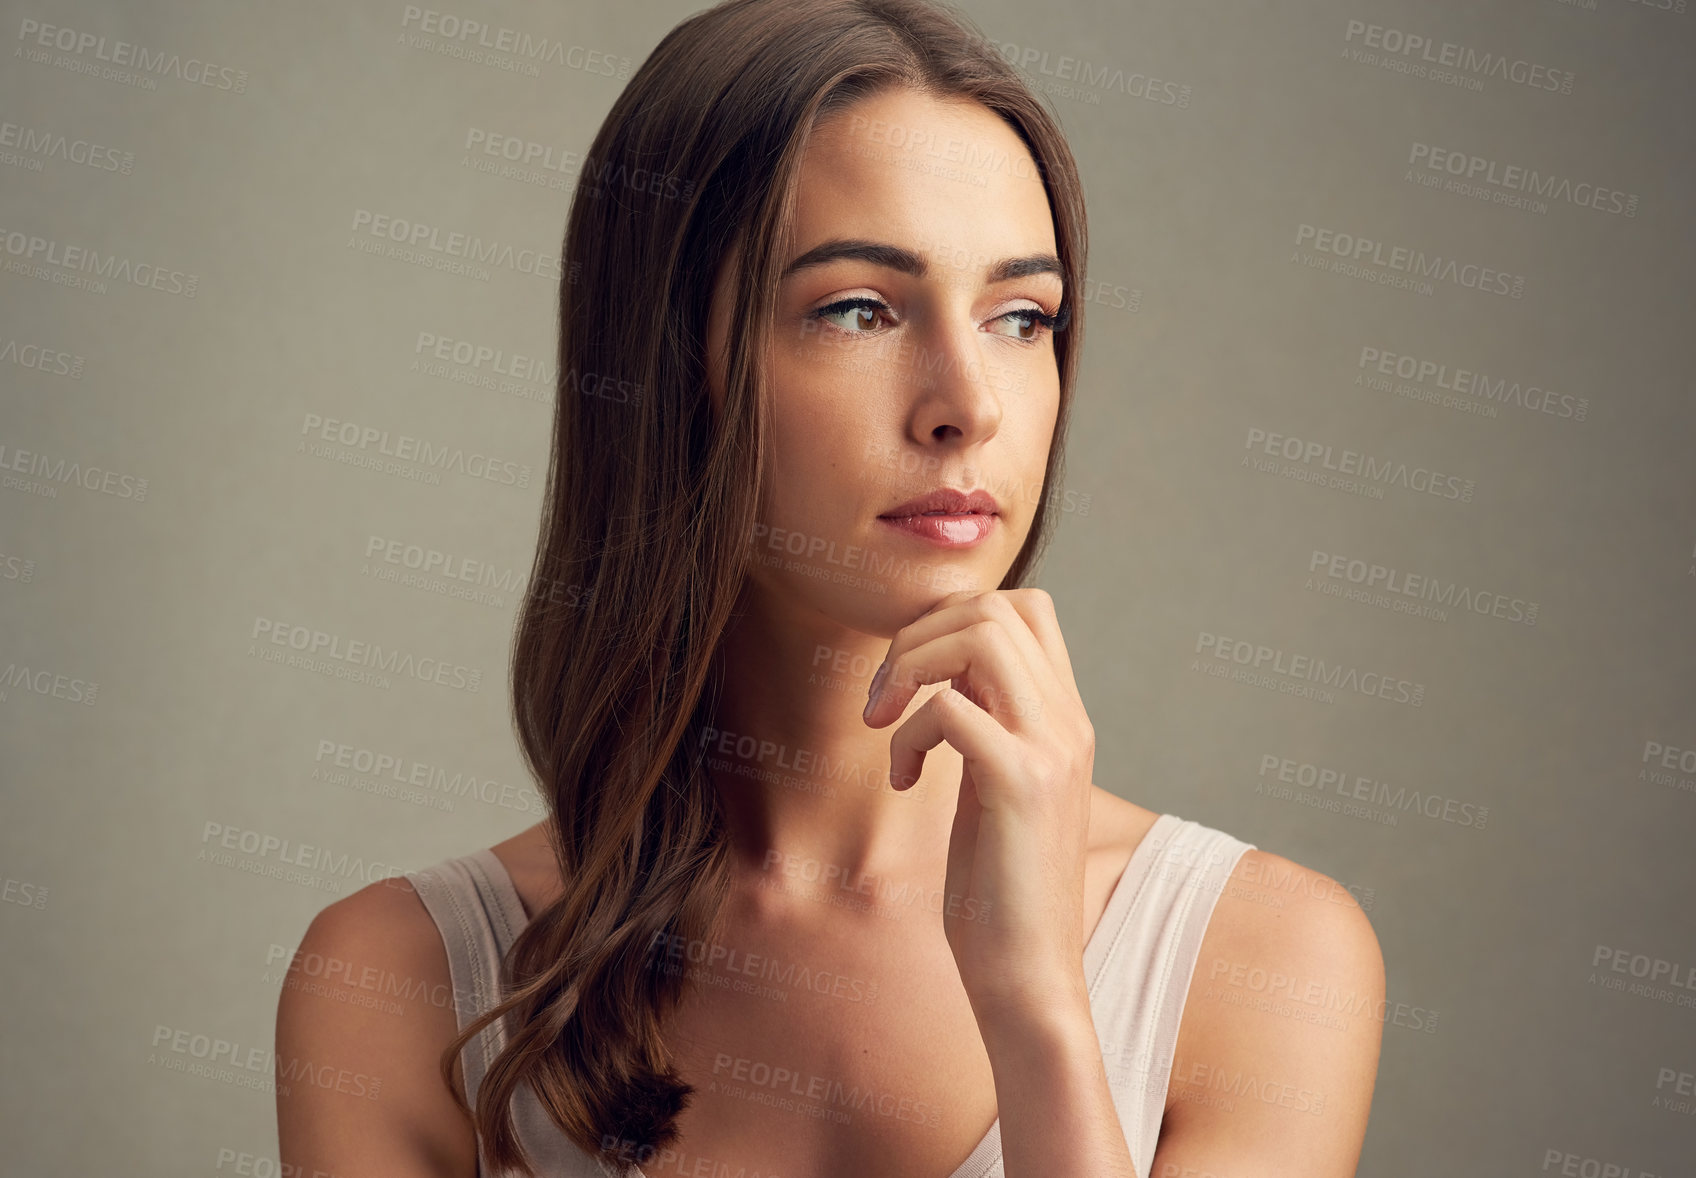 Buy stock photo Studio shot of an attractive young woman standing against a brown background